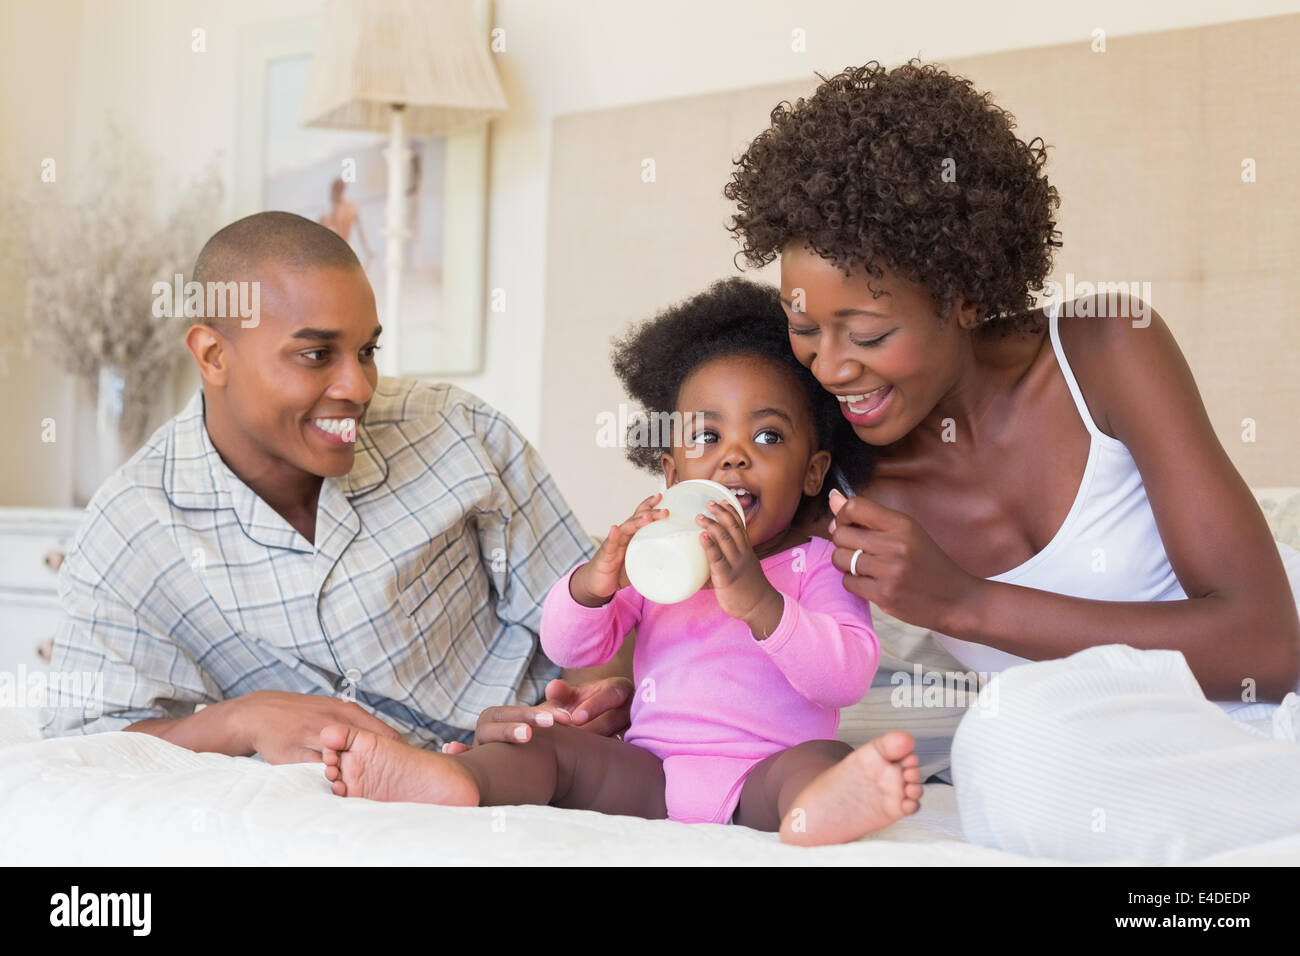 Happy parents with baby girl on their bed Stock Photo